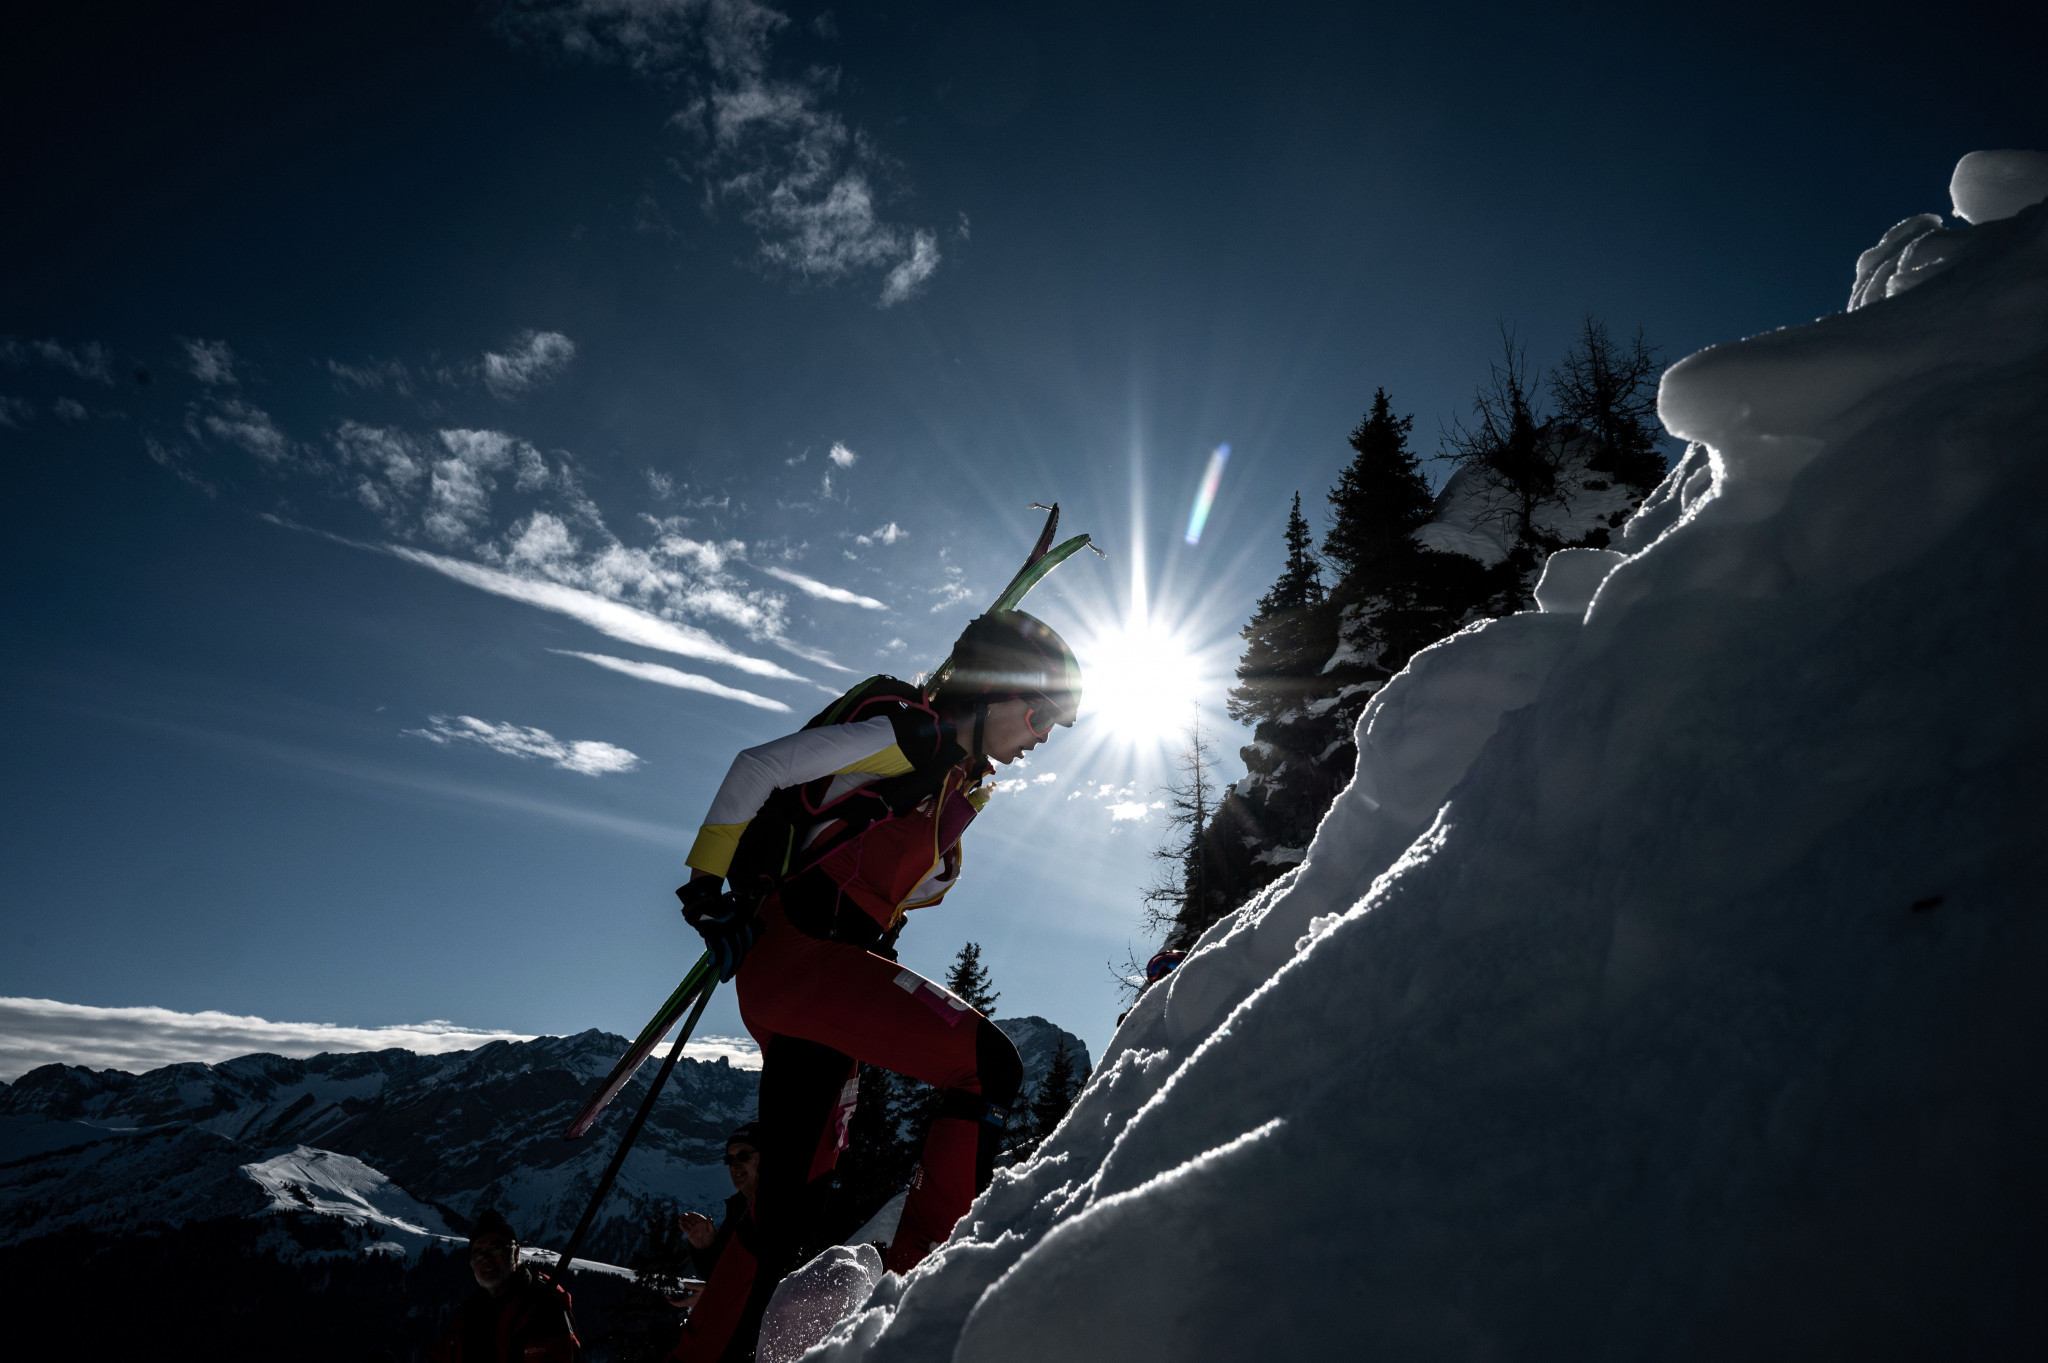 Ski mountaineering is to take place in Bormio ©Getty Images